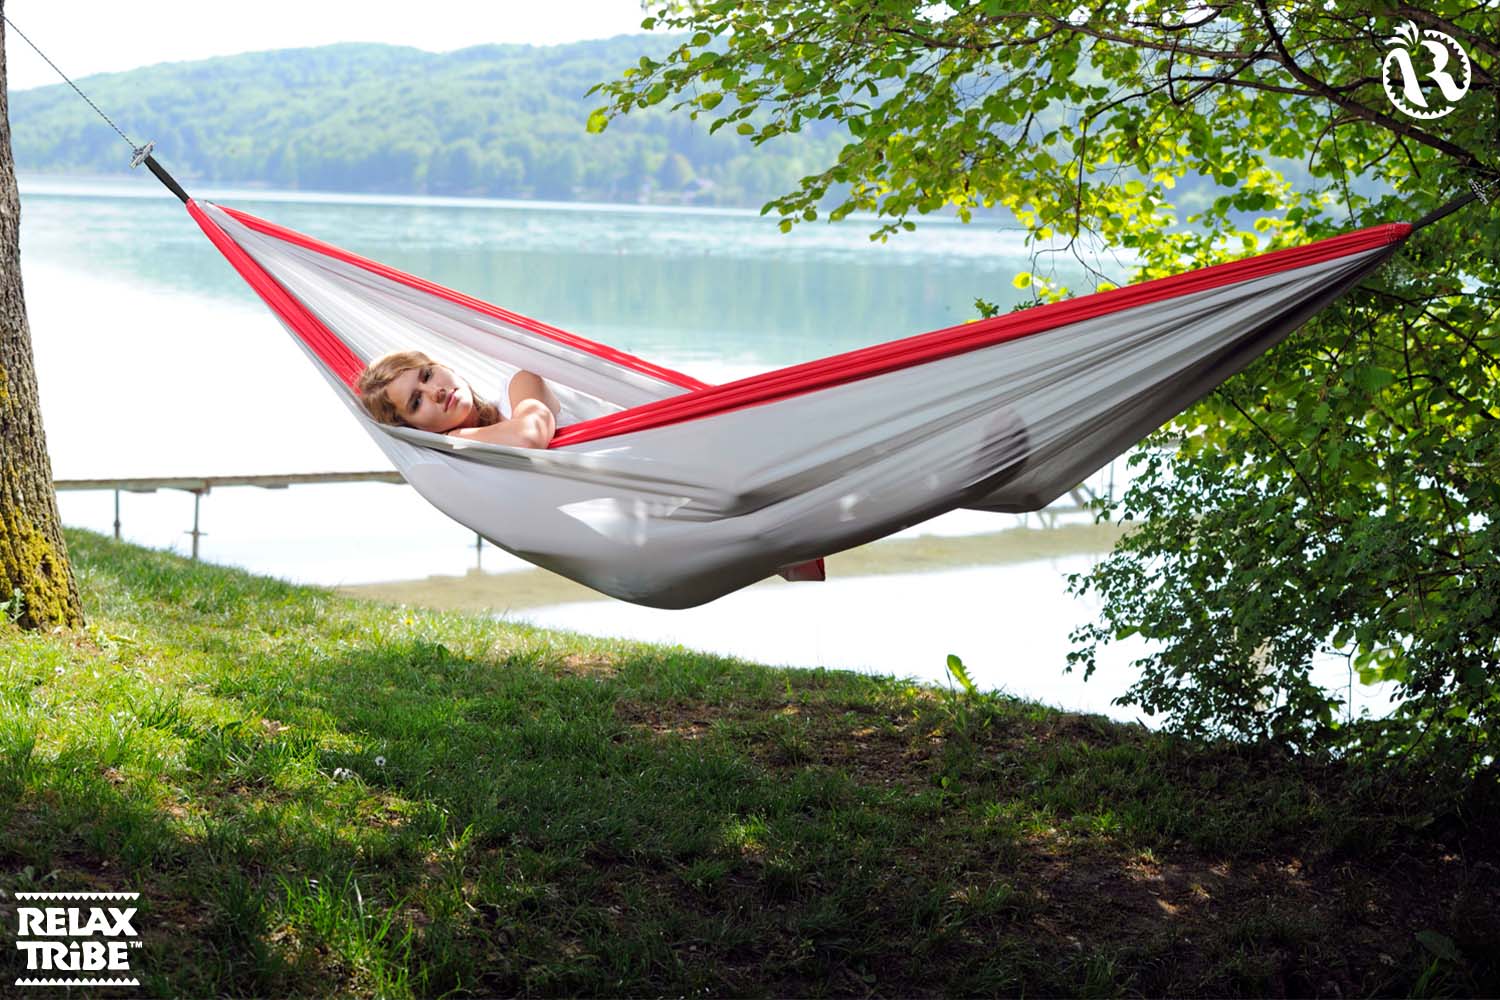 silk-traveller-xxl-double-family-portable-travel-hammock-for-outdoor-camping-grey-silver-red-trees